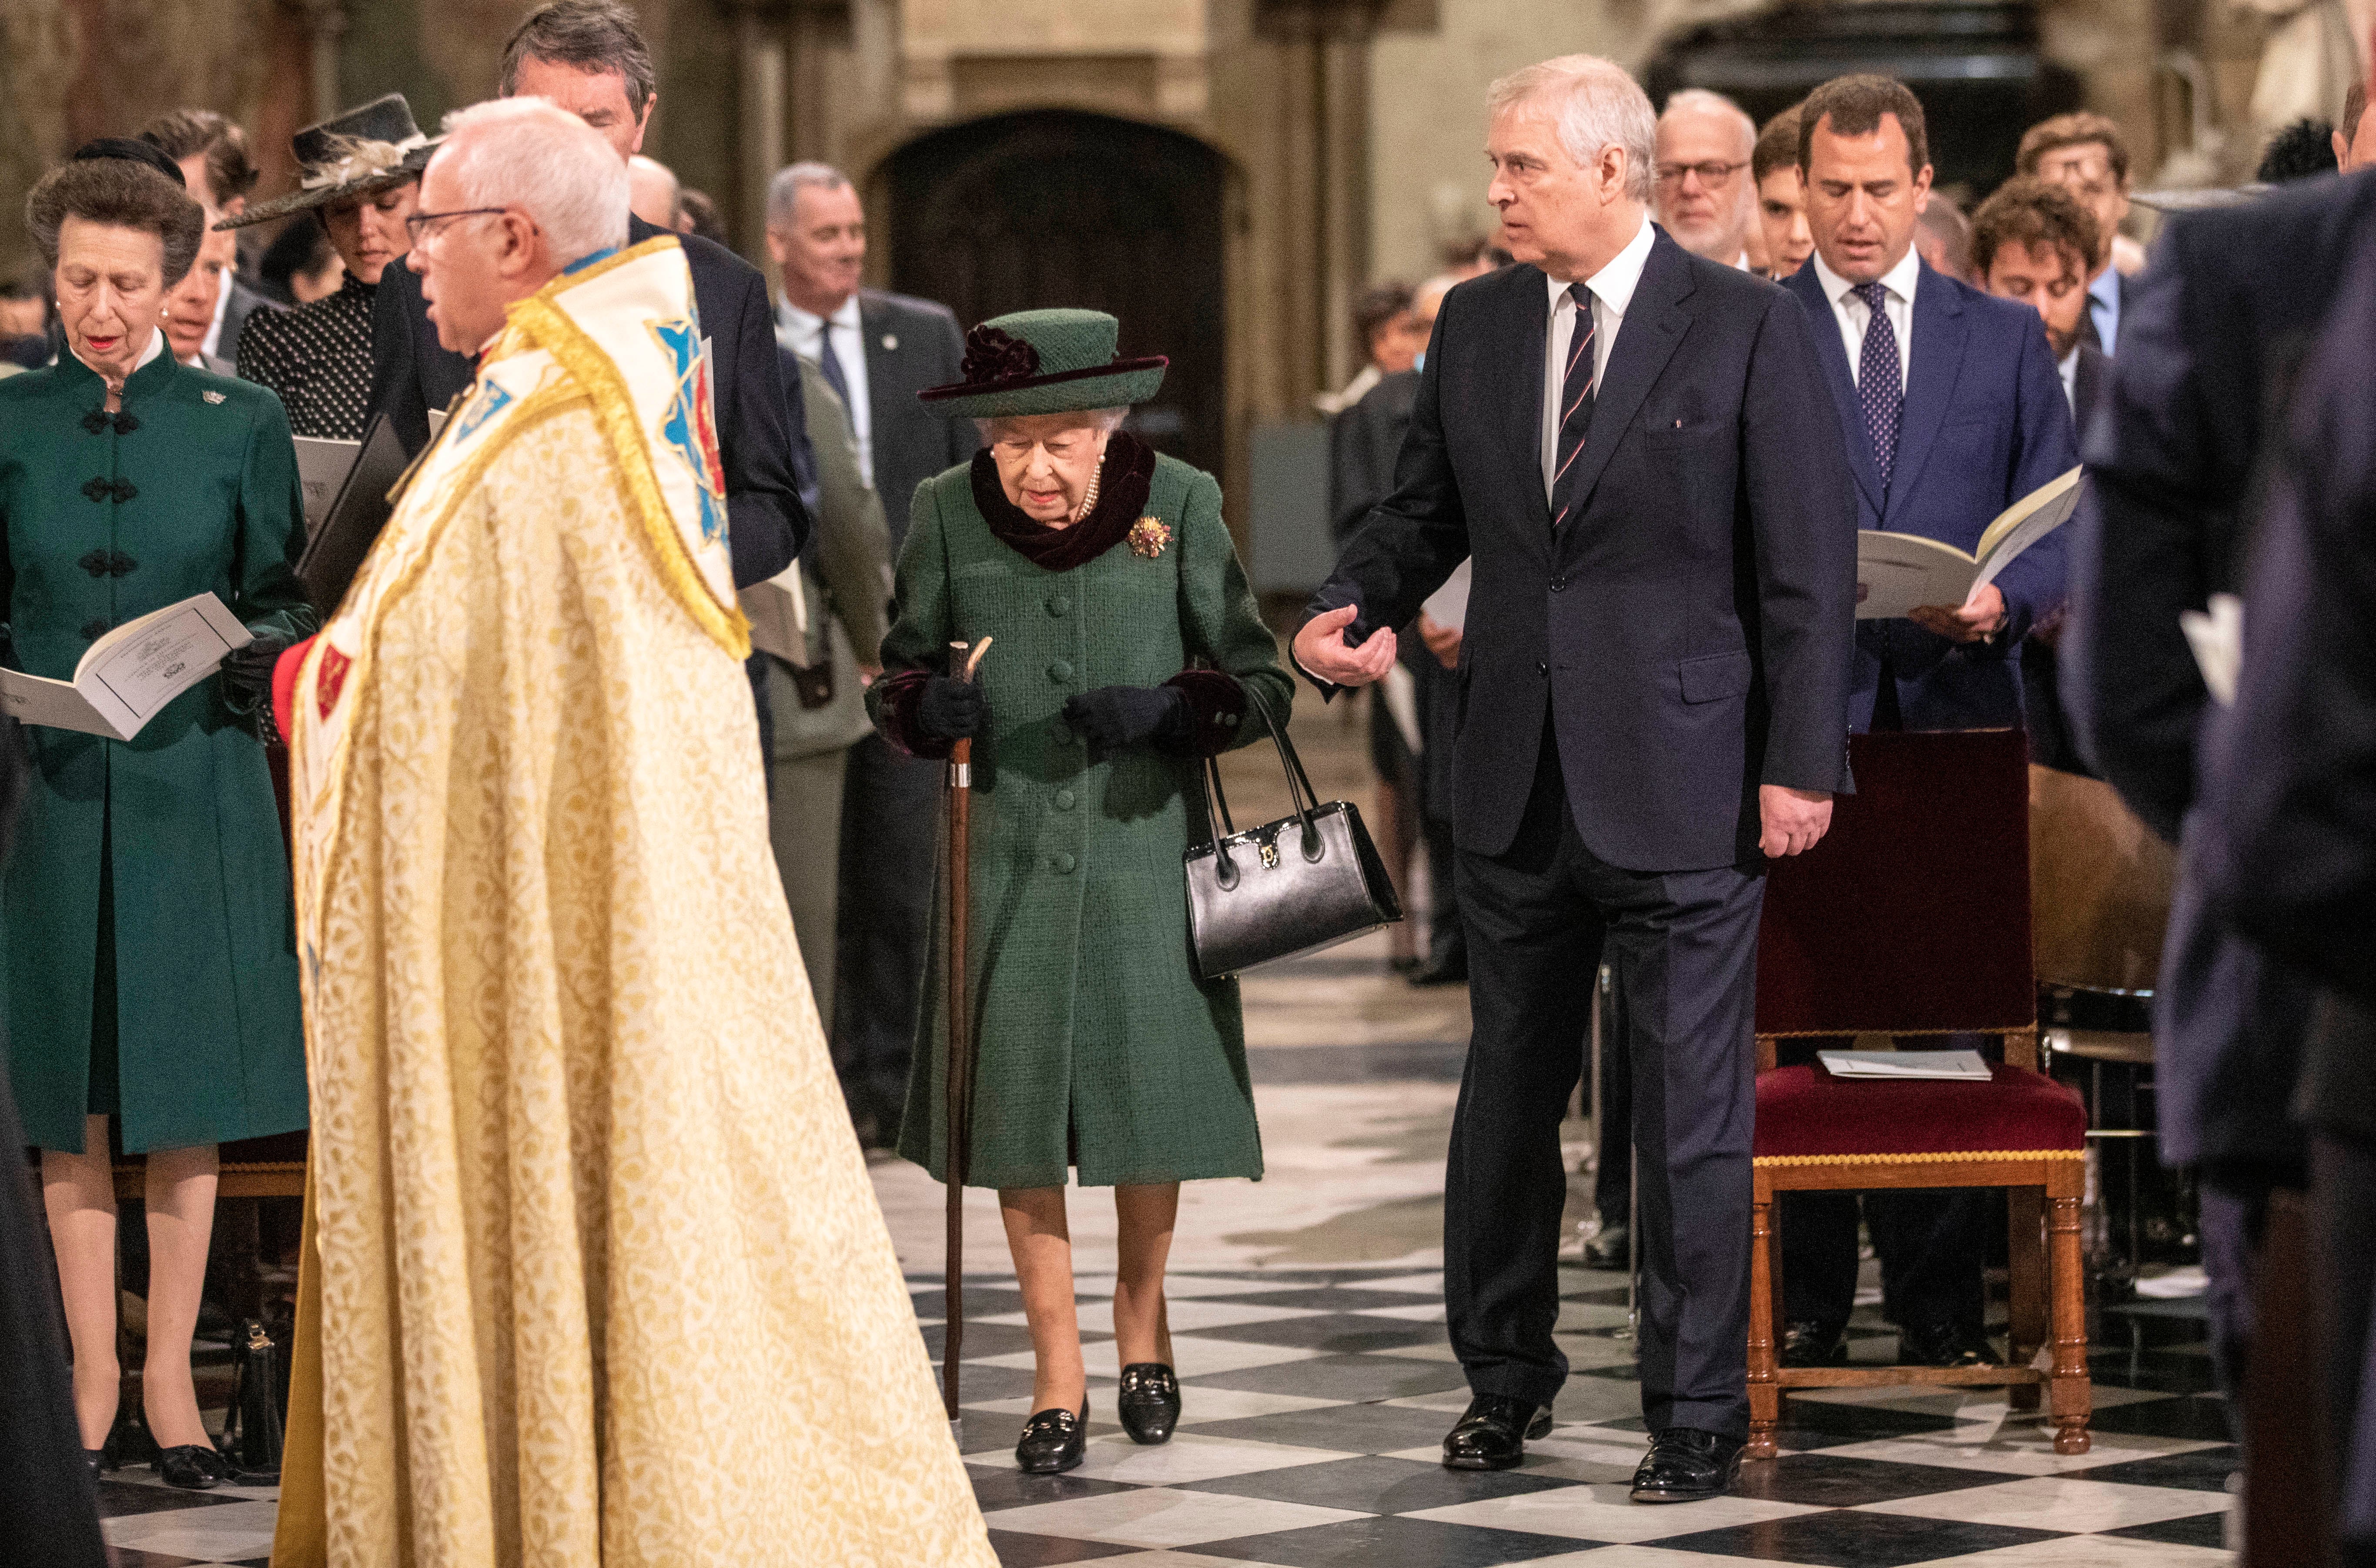 The Queen and Prince Andrew arrive at Prince Philip’s memorial in March